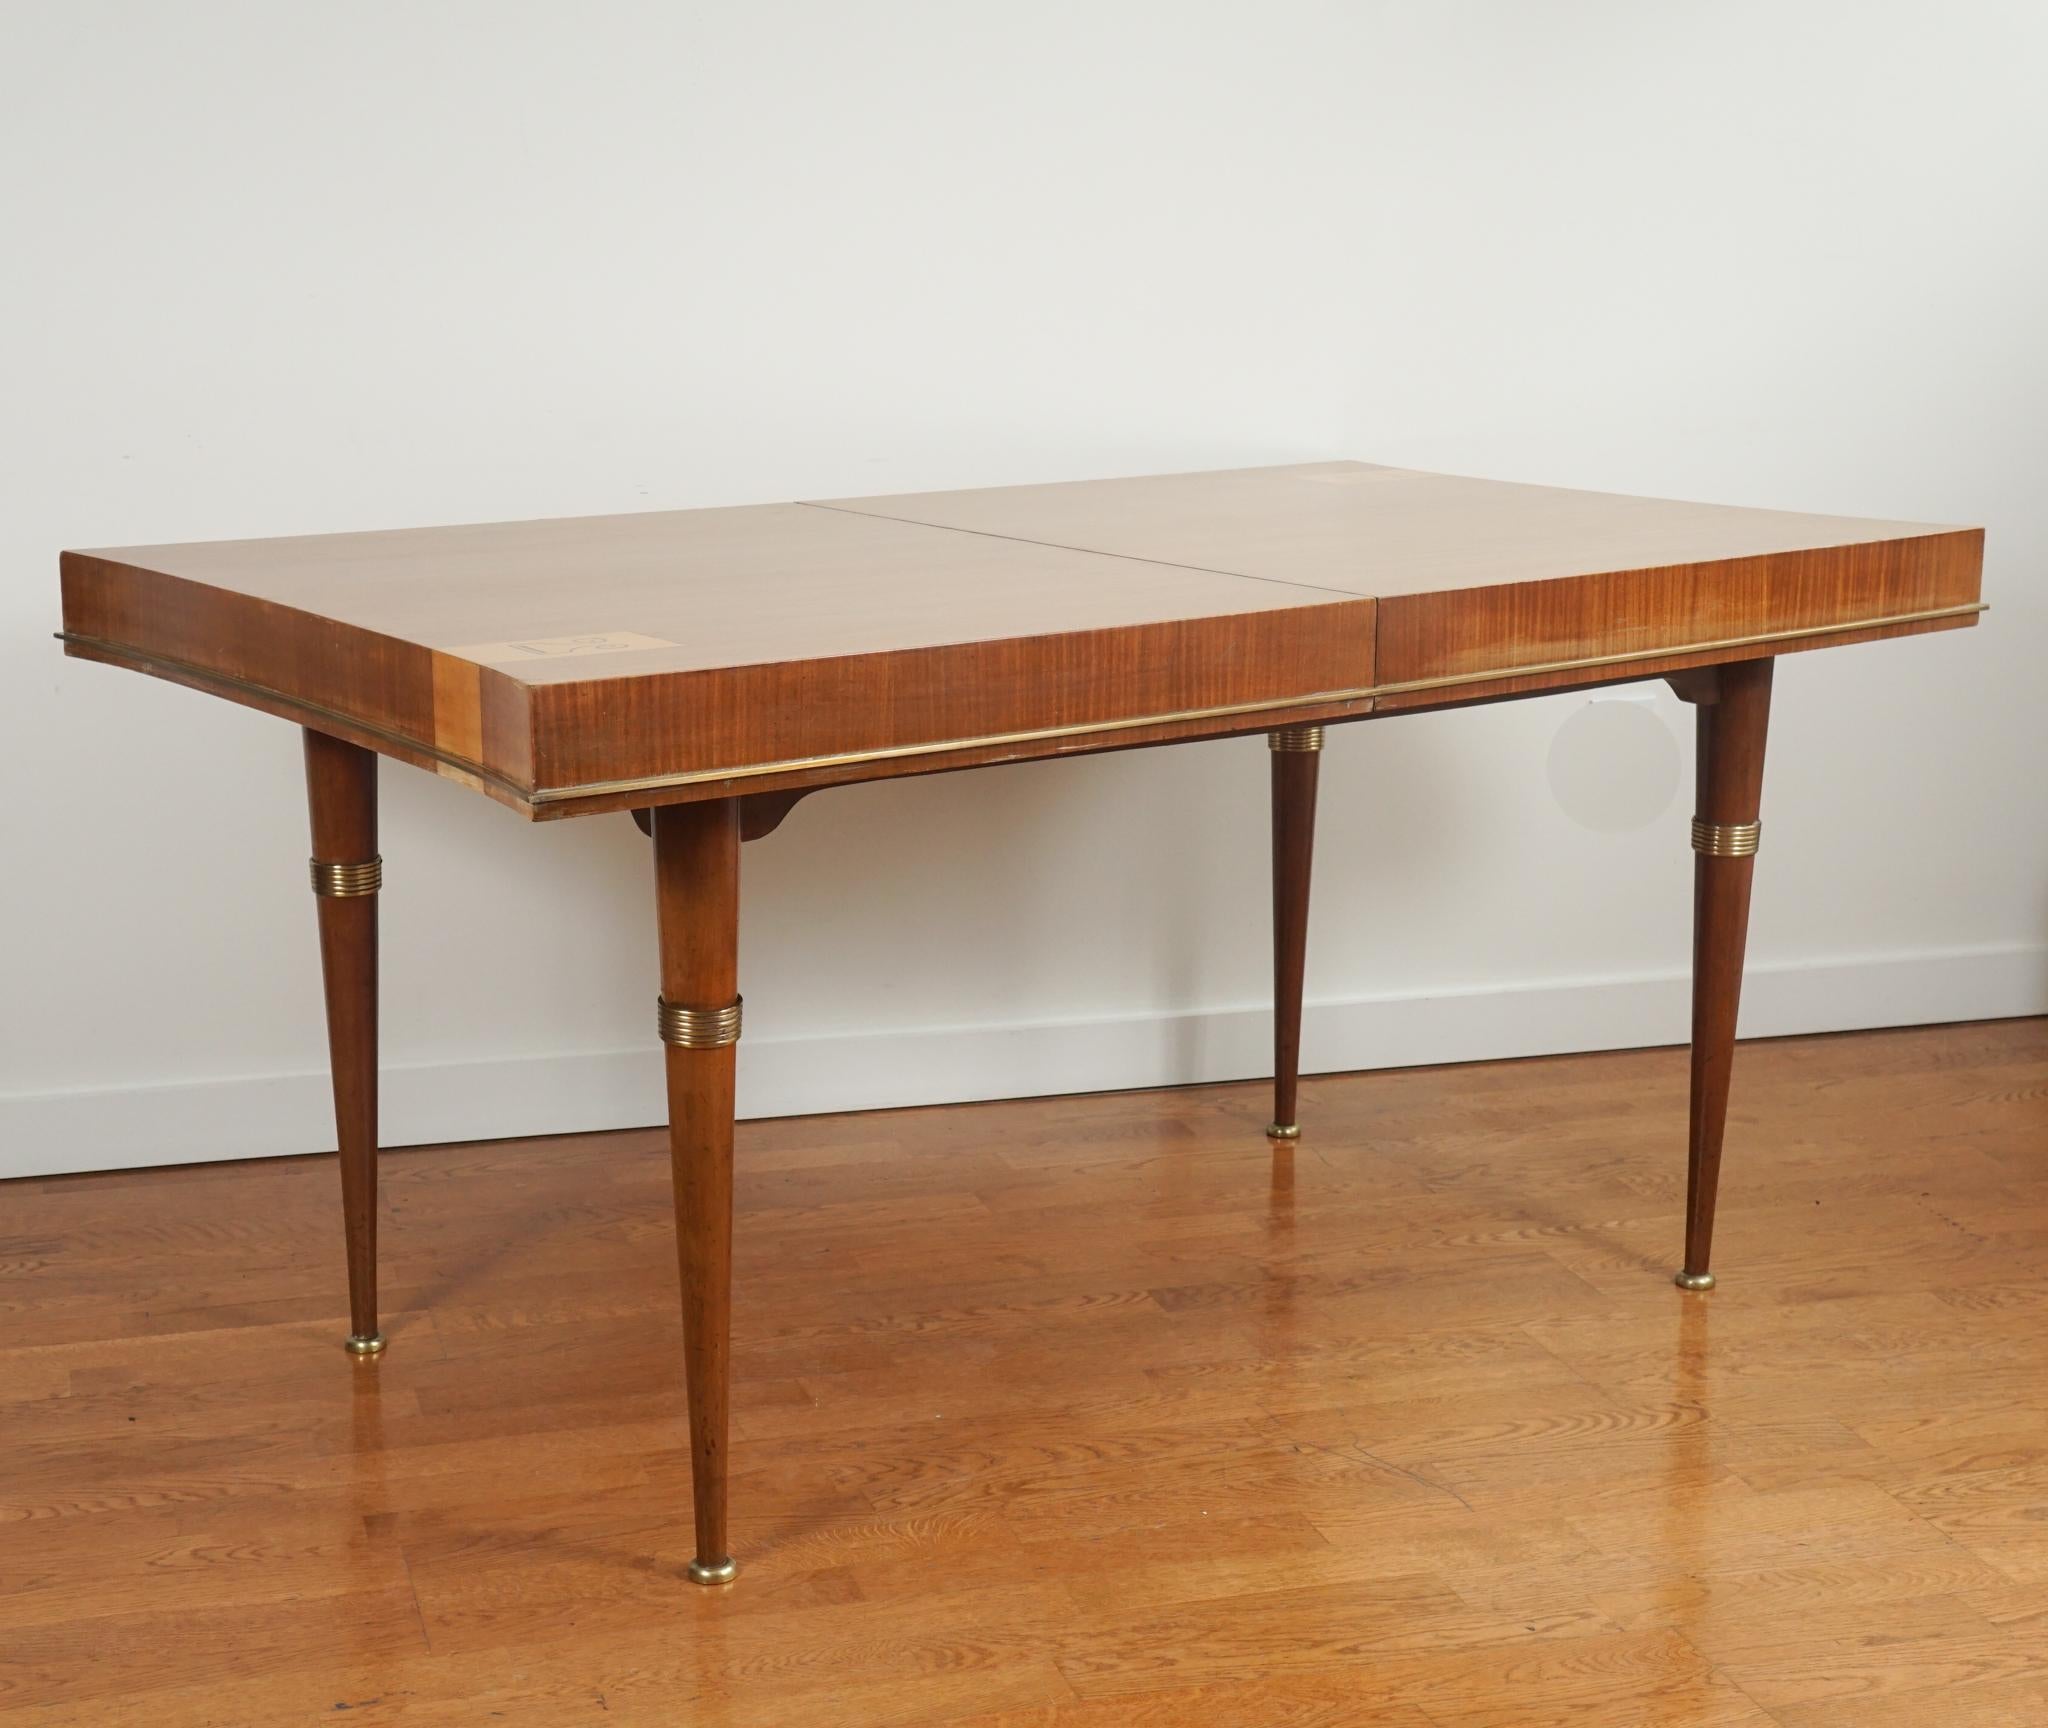 The furniture of French designer André Arbus is remembered for reintroducing neo-classicism to early and middle twentieth century design.  The extendable mahogany dining table from 1945, shown here, is in the manner of Arbus.  The graceful legs,